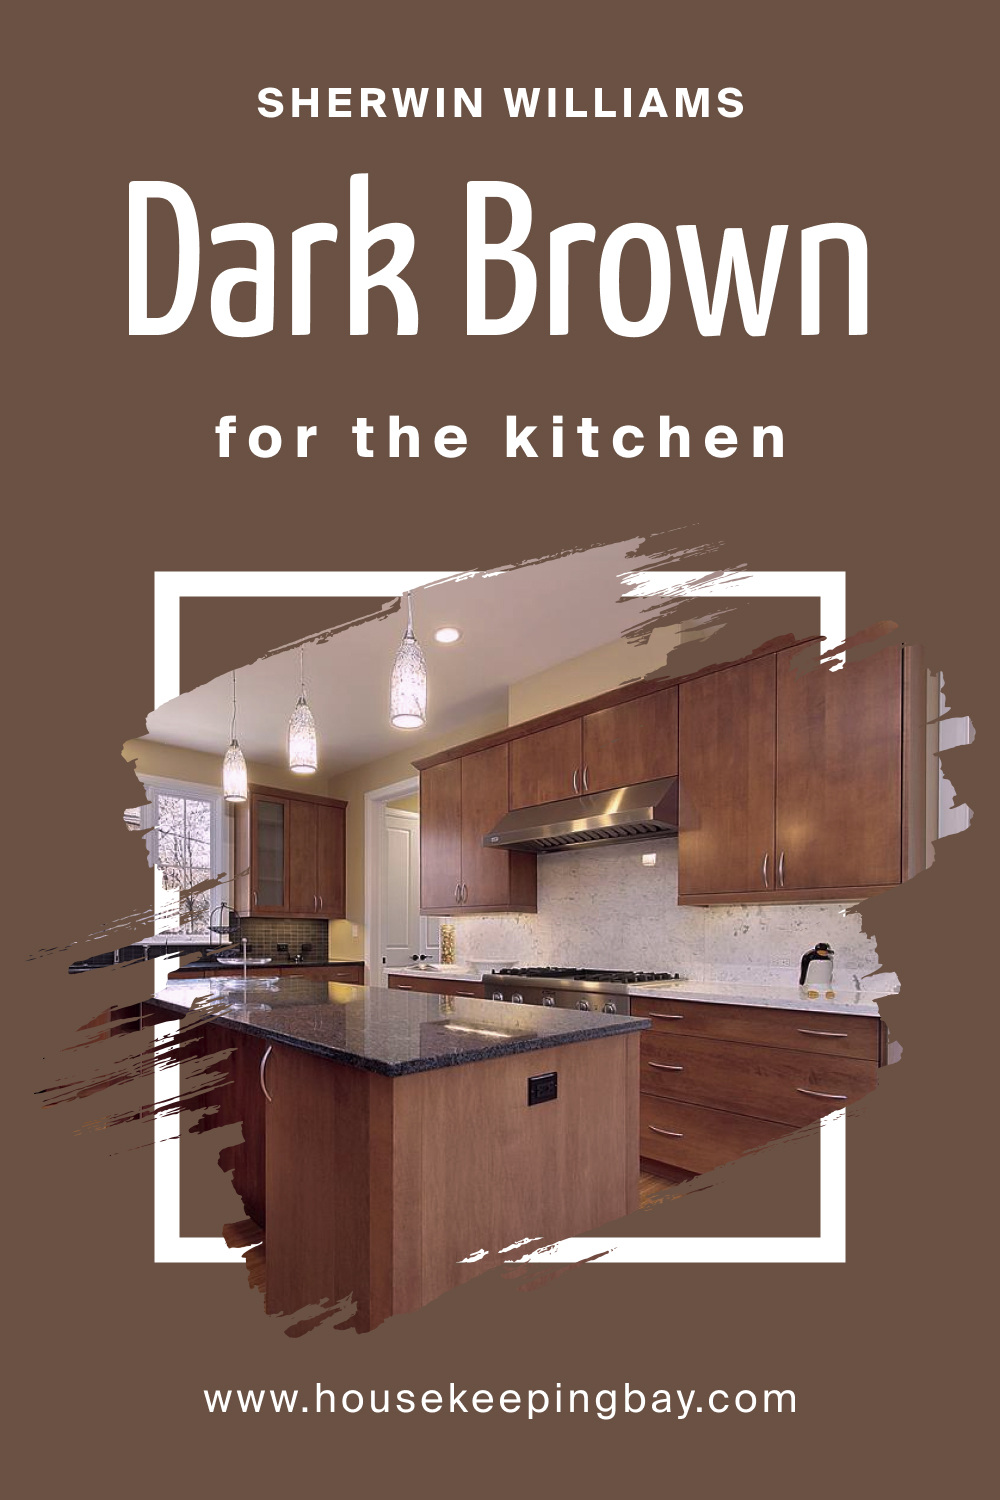 Sherwin Williams. SW 7520 Dark Brown For the Kitchens